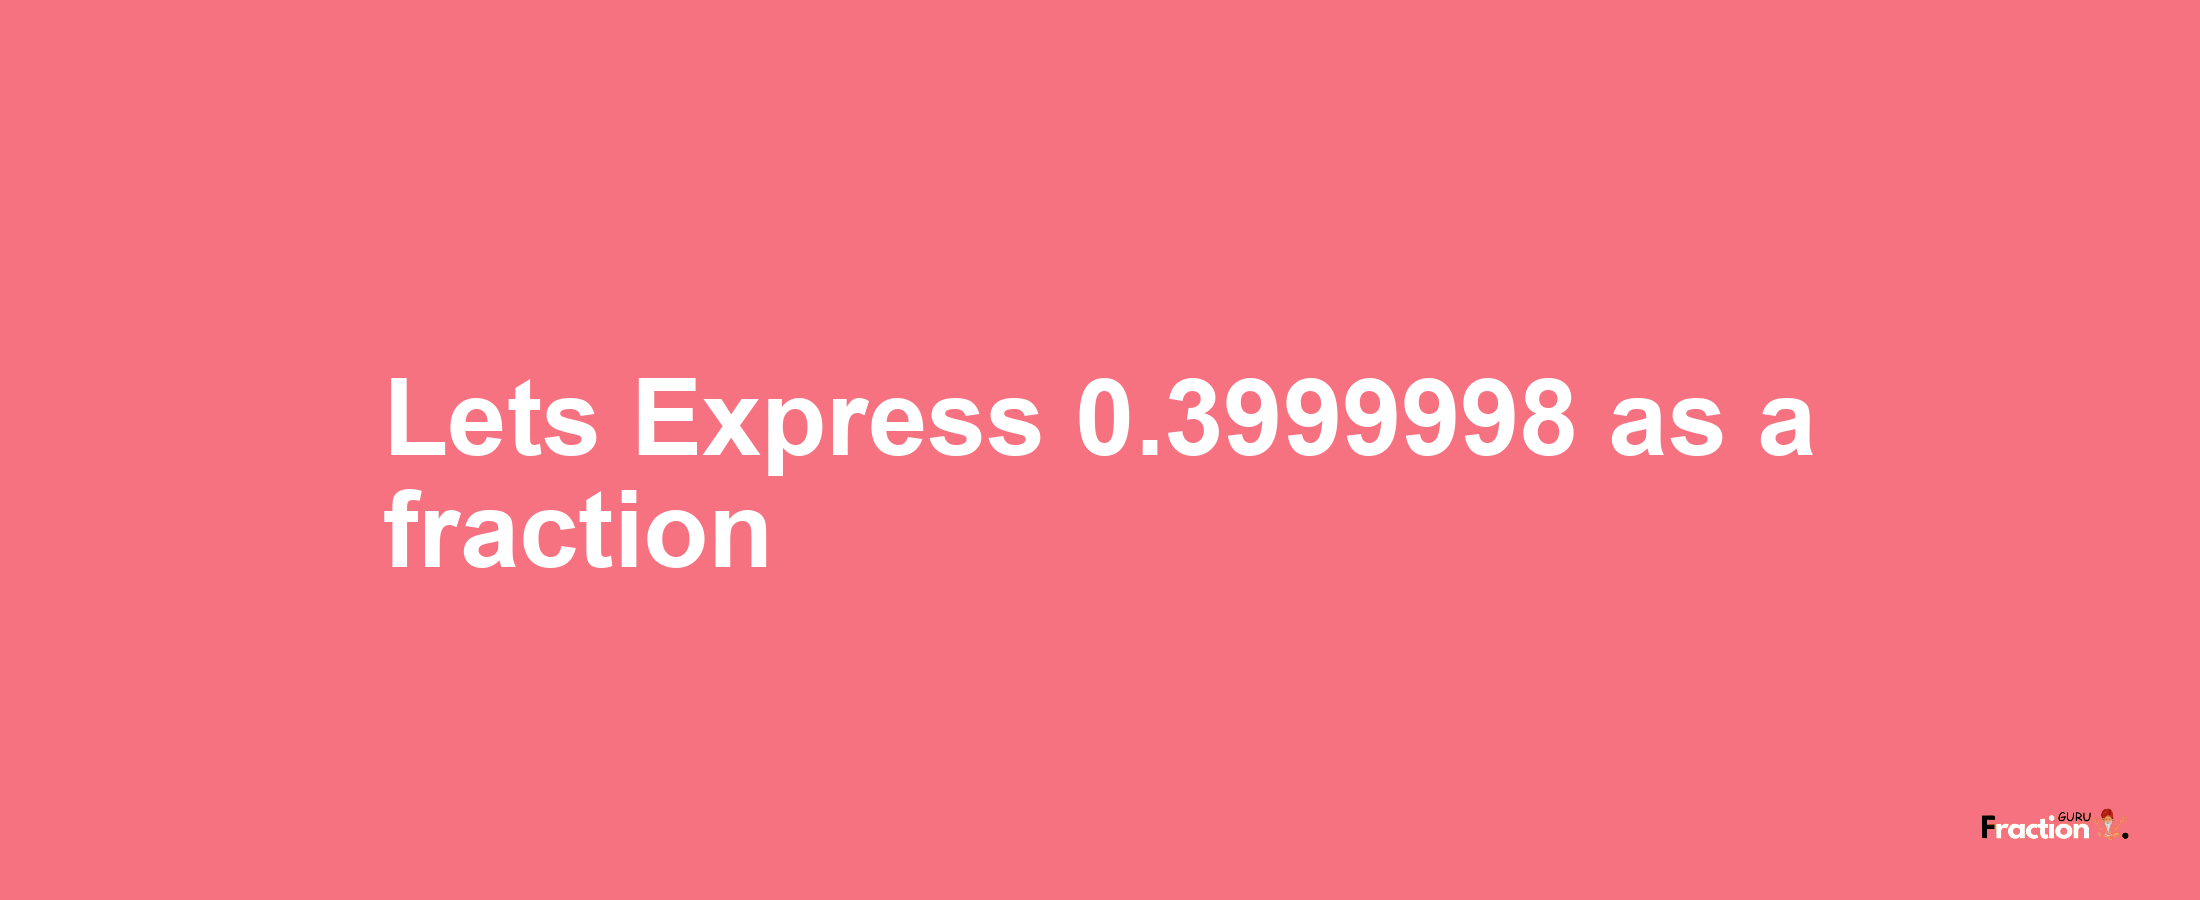 Lets Express 0.3999998 as afraction